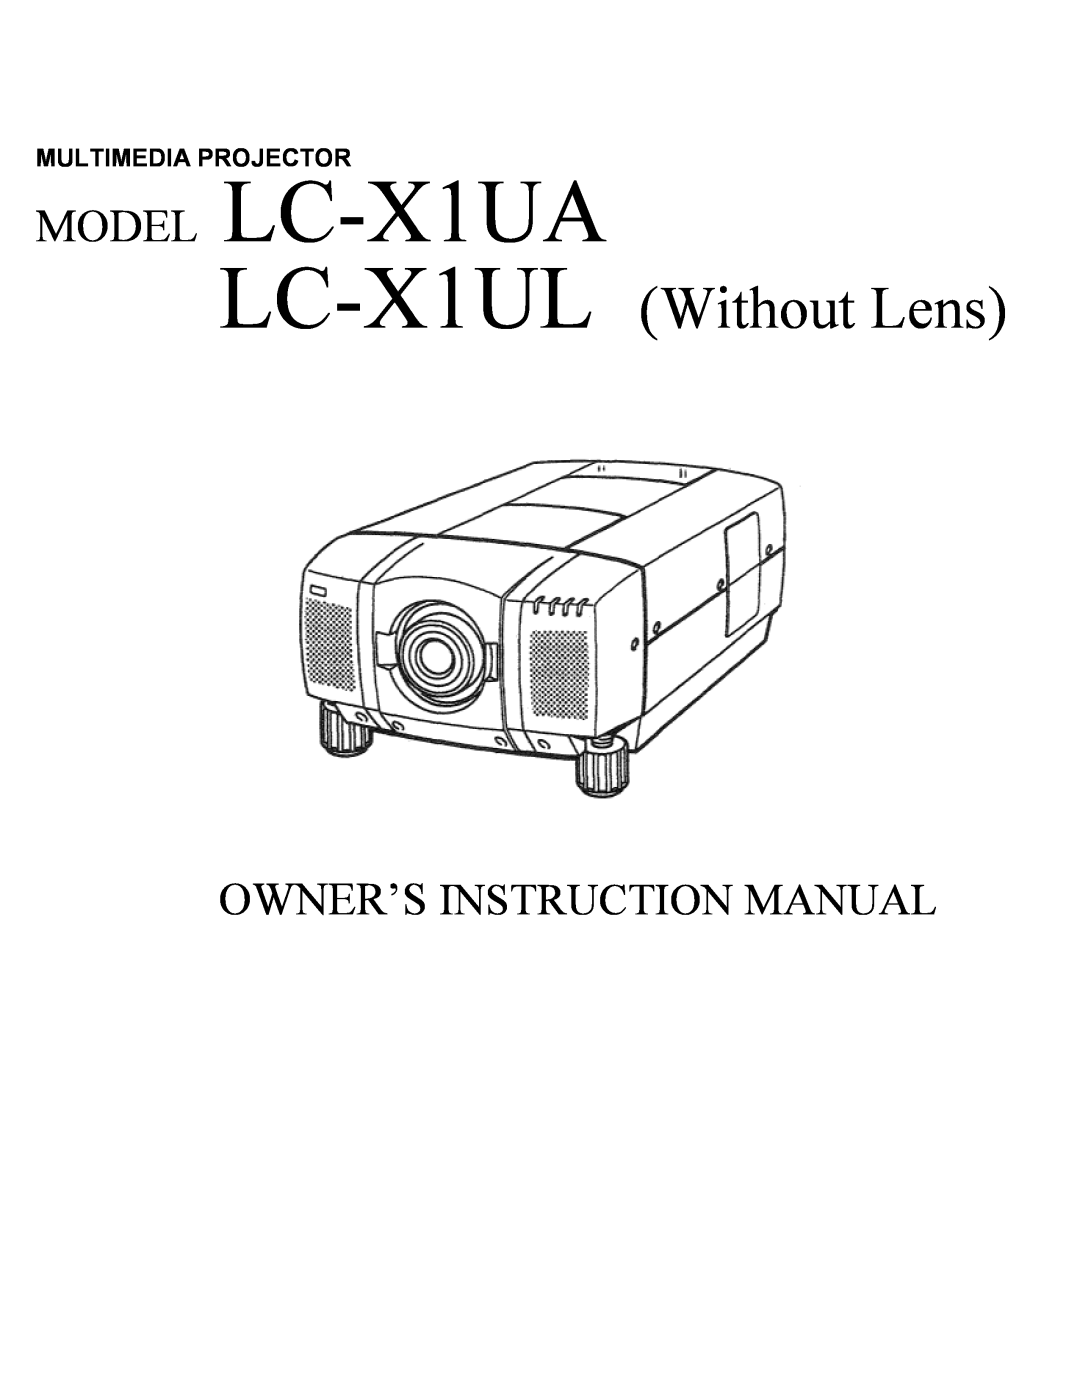 Eiki instruction manual Multimedia Projector, MODEL LC-X1UA, LC-X1UL Without Lens, Owner’S Instruction Manual 